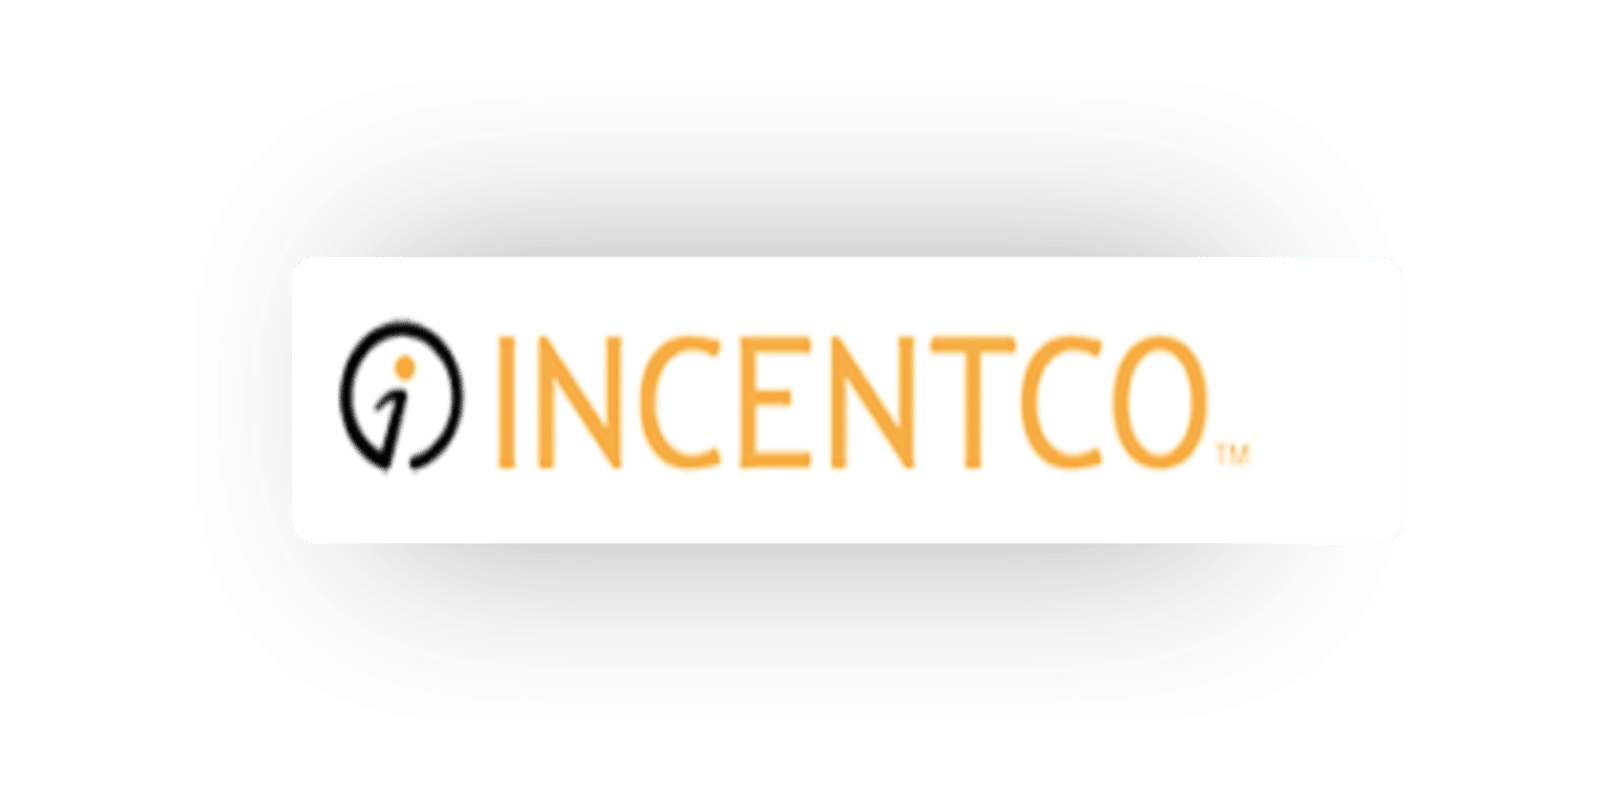 Through INCENTCO’s engagement and incentive technology, our customers are able to connect positive employee engagement, training outcomes, and behaviors to incentives and behavioral rewards.